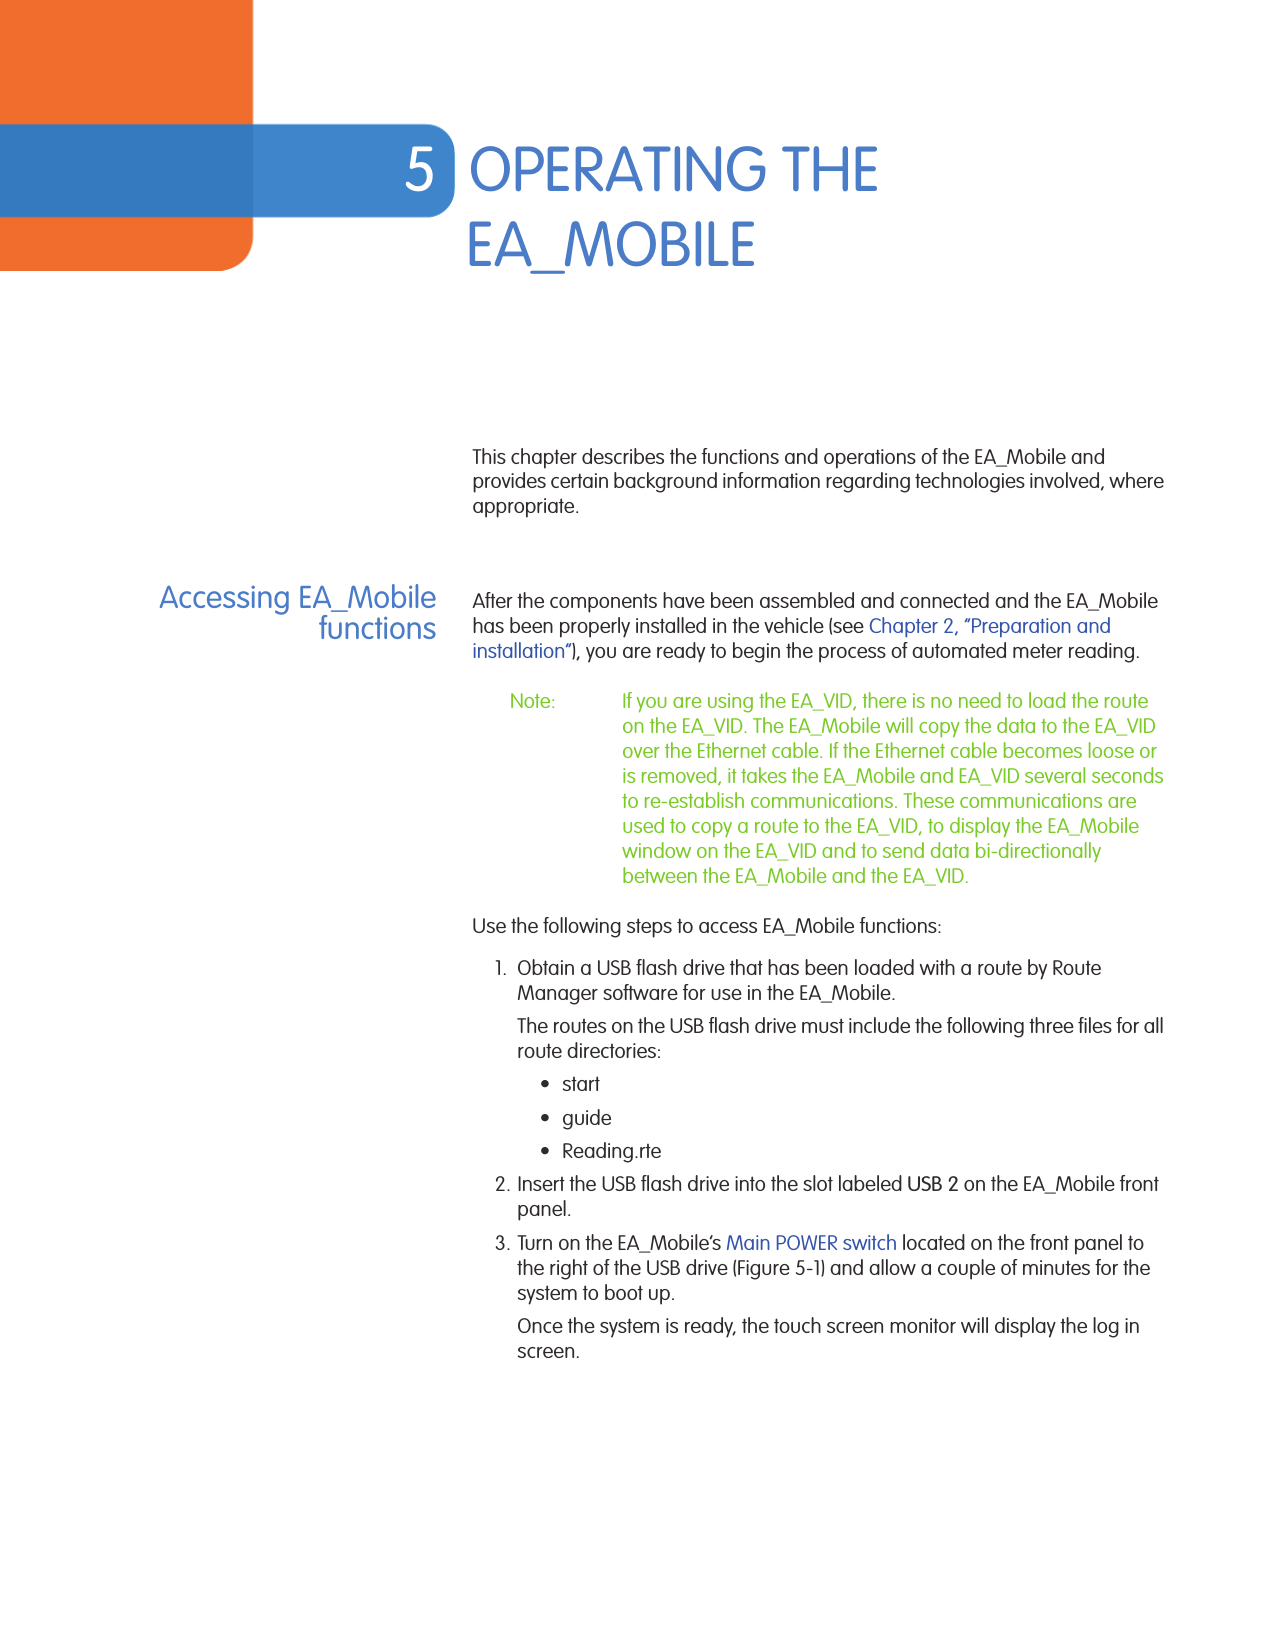 5OPERATING THE EA_MOBILEThis chapter describes the functions and operations of the EA_Mobile and provides certain background information regarding technologies involved, where appropriate.Accessing EA_MobilefunctionsAfter the components have been assembled and connected and the EA_Mobile has been properly installed in the vehicle (see Chapter 2, “Preparation and installation”), you are ready to begin the process of automated meter reading. Note: If you are using the EA_VID, there is no need to load the route on the EA_VID. The EA_Mobile will copy the data to the EA_VID over the Ethernet cable. If the Ethernet cable becomes loose or is removed, it takes the EA_Mobile and EA_VID several seconds to re-establish communications. These communications are used to copy a route to the EA_VID, to display the EA_Mobile window on the EA_VID and to send data bi-directionally between the EA_Mobile and the EA_VID.Use the following steps to access EA_Mobile functions:1. Obtain a USB flash drive that has been loaded with a route by Route Manager software for use in the EA_Mobile. The routes on the USB flash drive must include the following three files for all route directories:•start•guide• Reading.rte2. Insert the USB flash drive into the slot labeled USB 2 on the EA_Mobile front panel.3. Turn on the EA_Mobile’s Main POWER switch located on the front panel to the right of the USB drive (Figure 5-1) and allow a couple of minutes for the system to boot up.Once the system is ready, the touch screen monitor will display the log in screen.EA Mobile User Guide